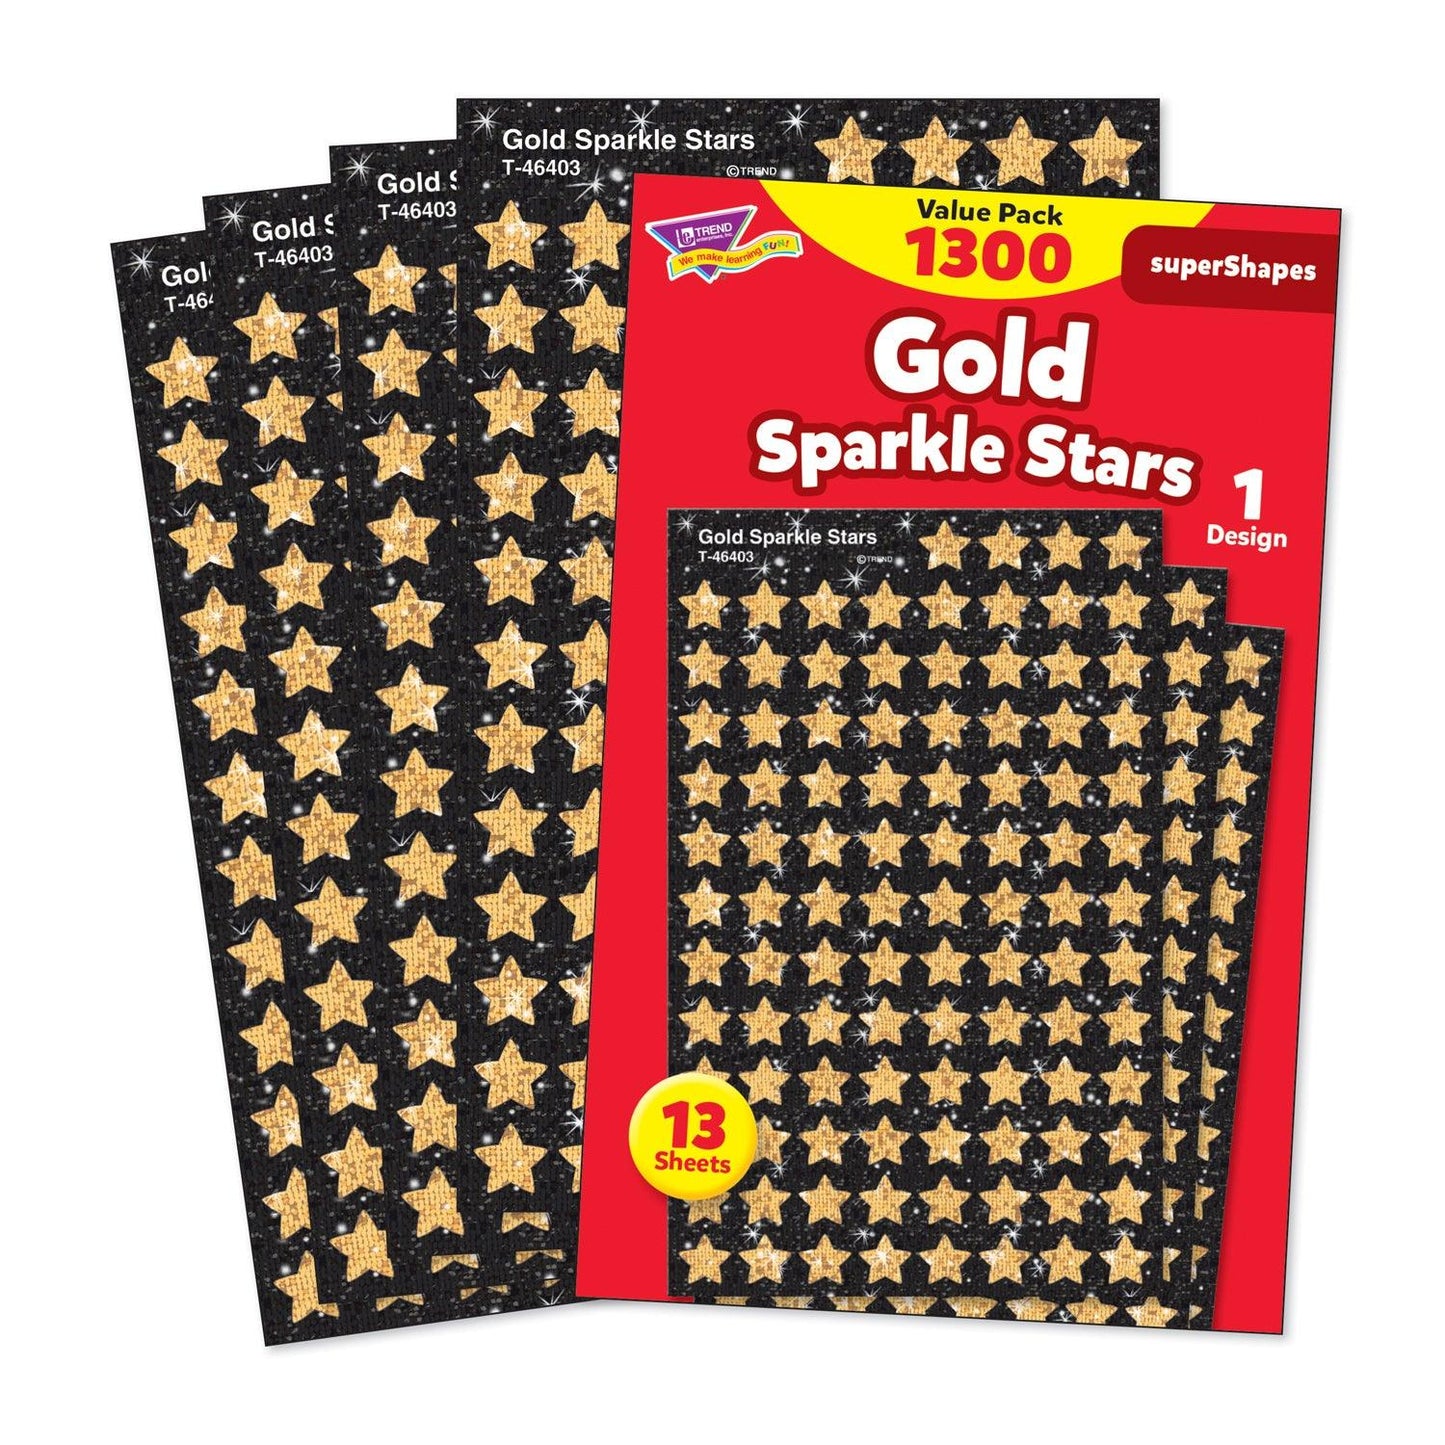 Gold Sparkle Stars superShapes Value Pack, 1300 Per Pack, 3 Packs - Loomini